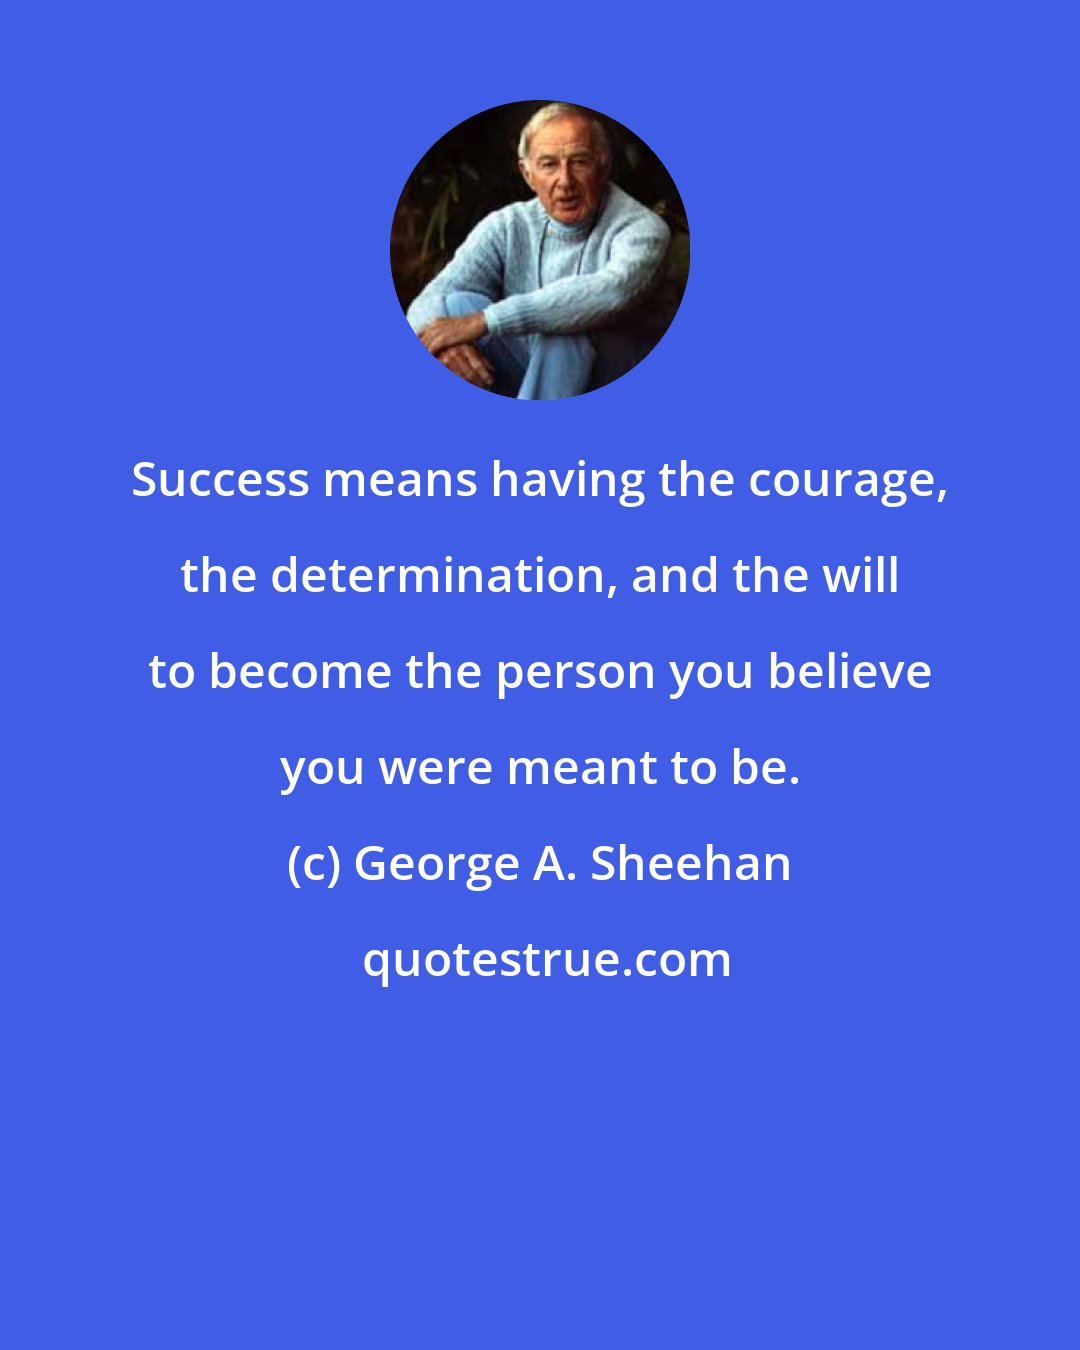 George A. Sheehan: Success means having the courage, the determination, and the will to become the person you believe you were meant to be.